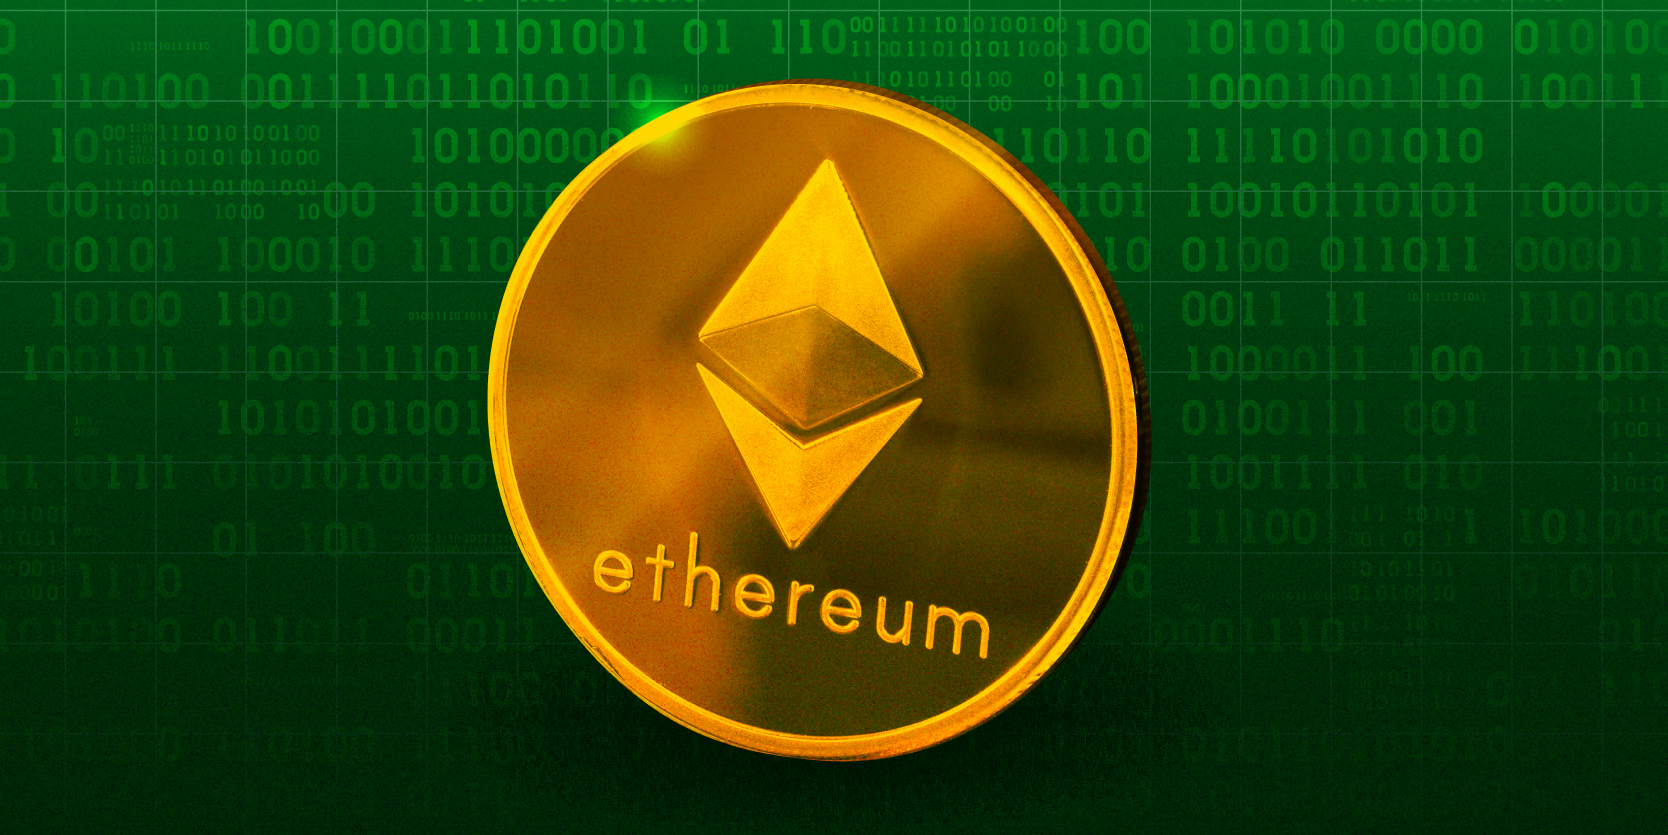 Ethereum coin on green financial background